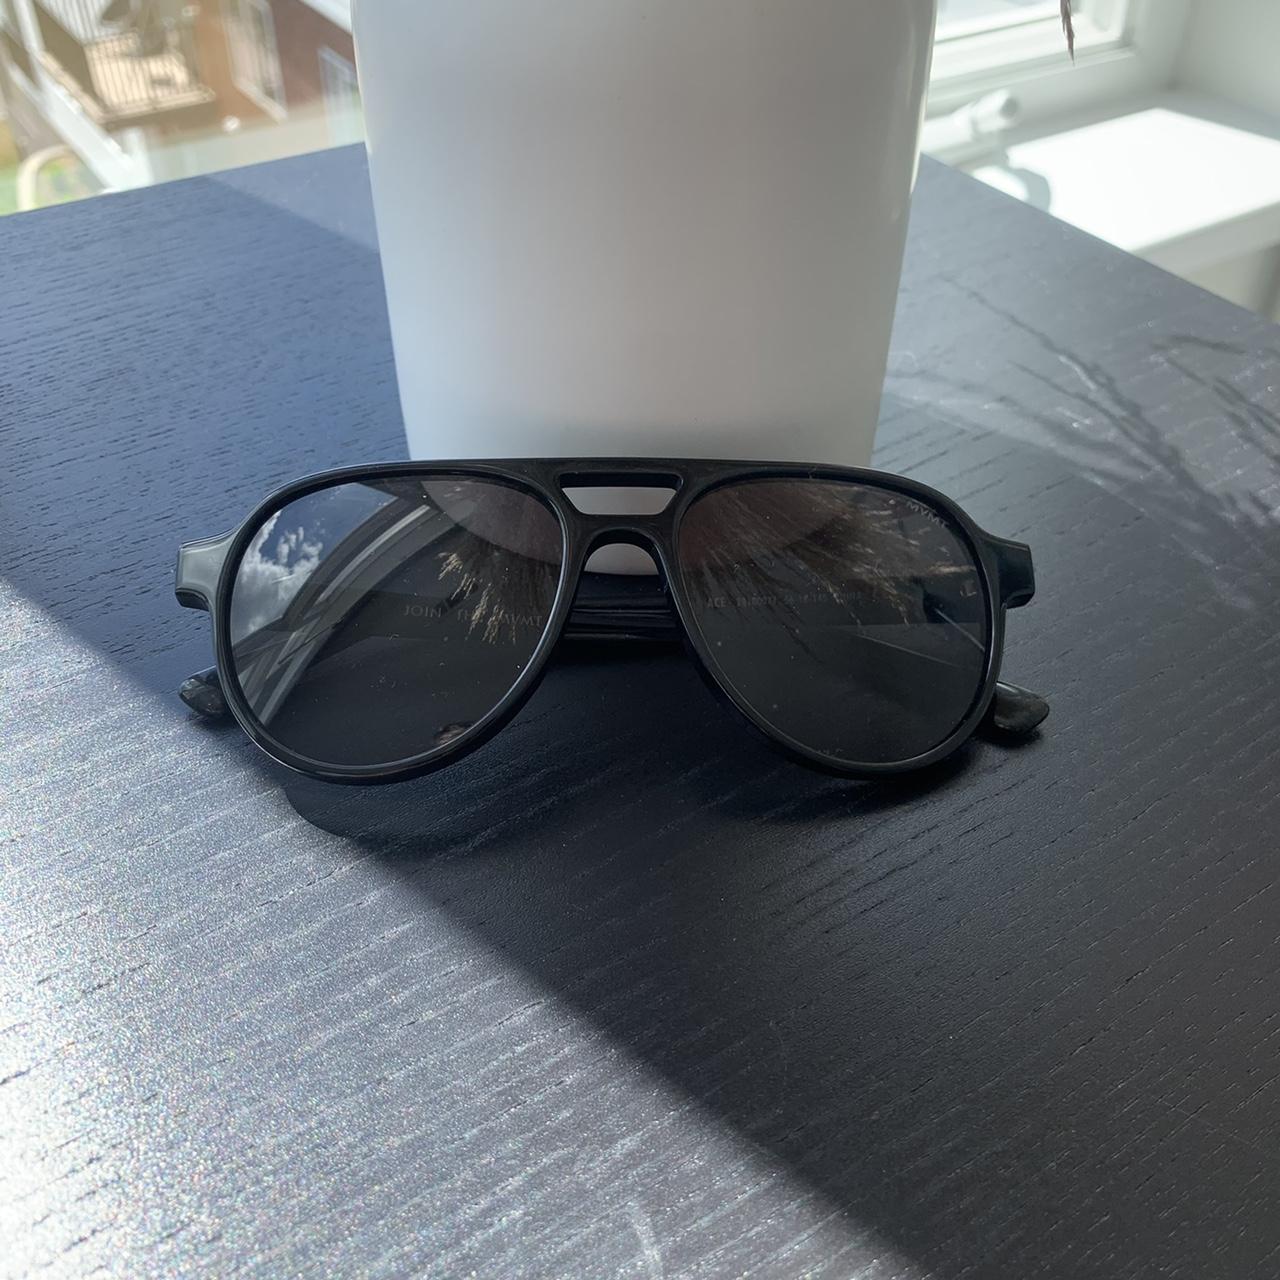 Product Image 2 - BRAND NEW MVMT Ace Sunglasses
Only